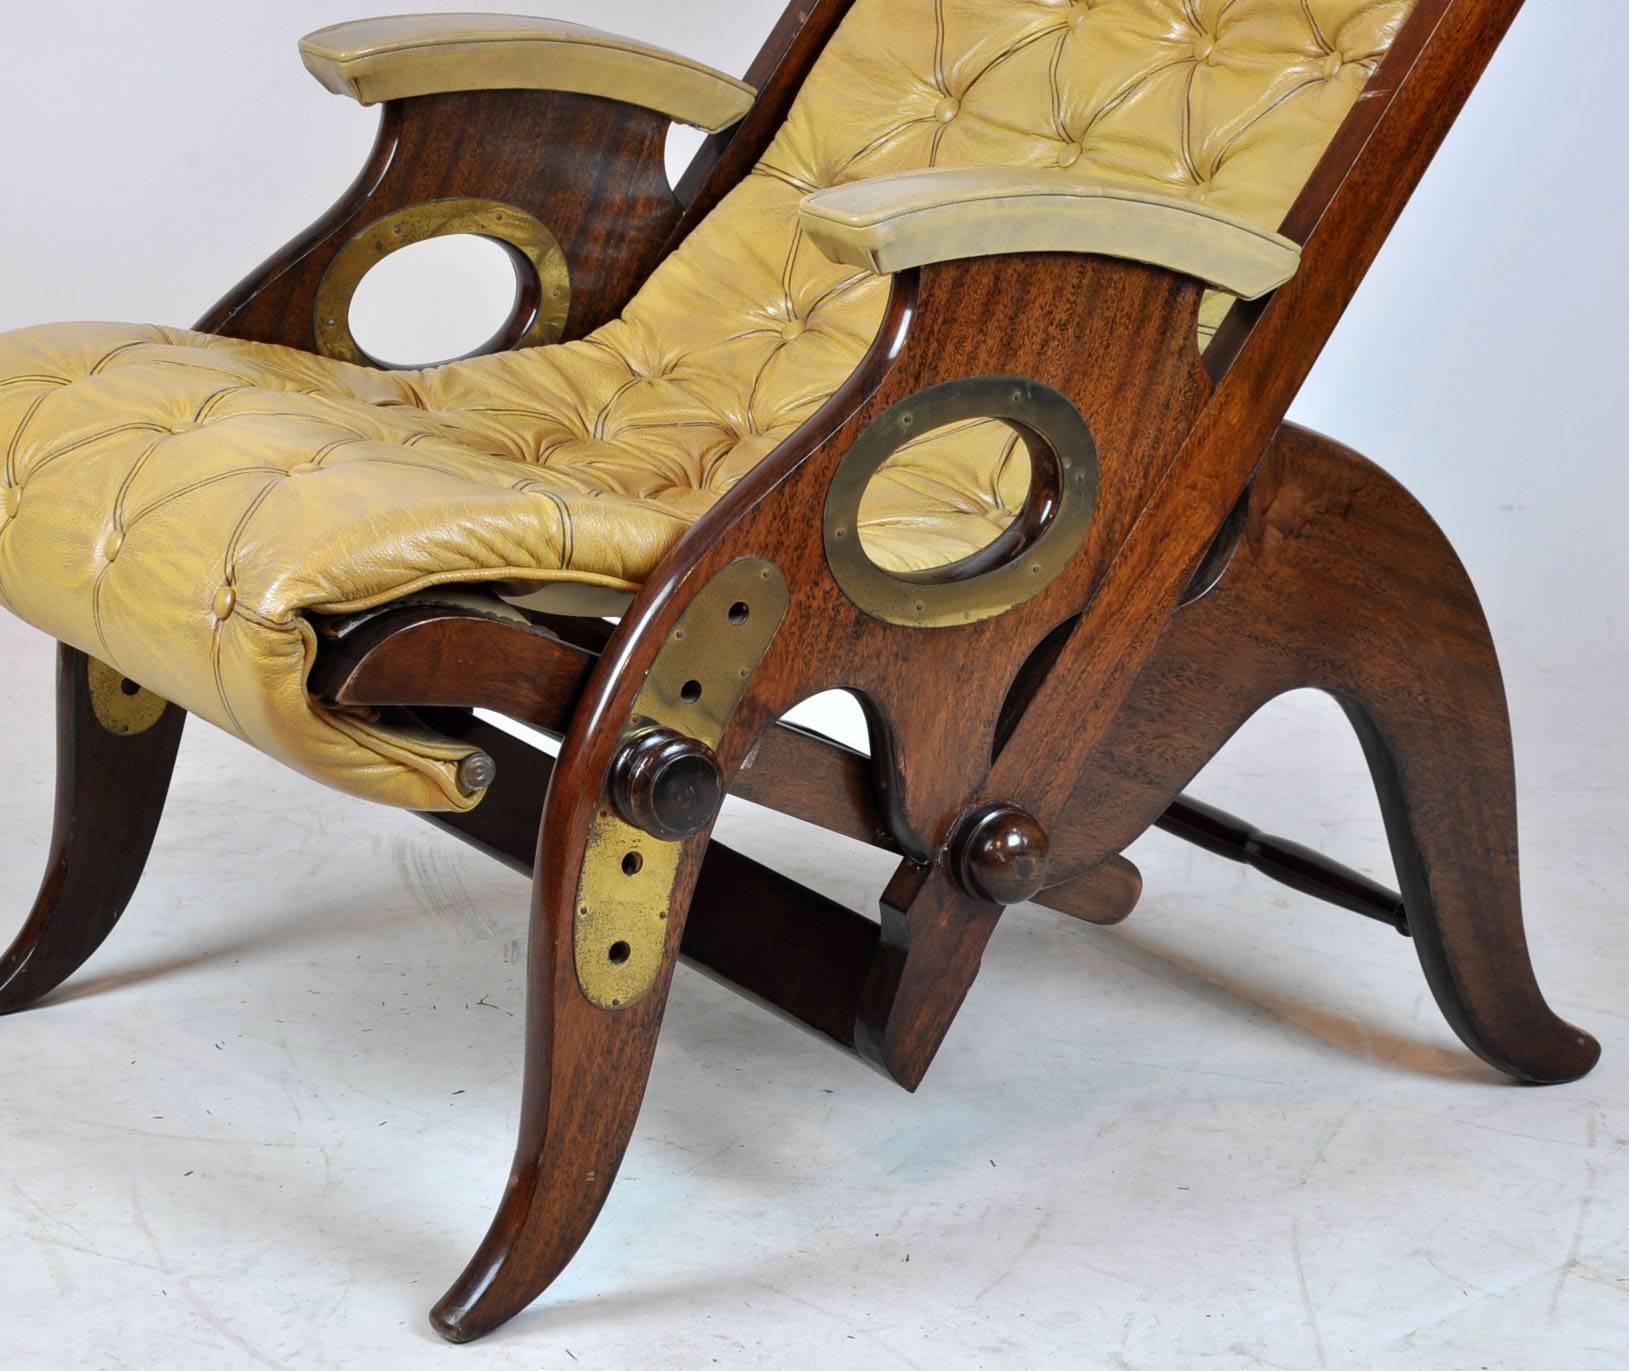 French Deck Chair with Adjustable Seat by or in the Manner of Jean-Pierre Hagnauer